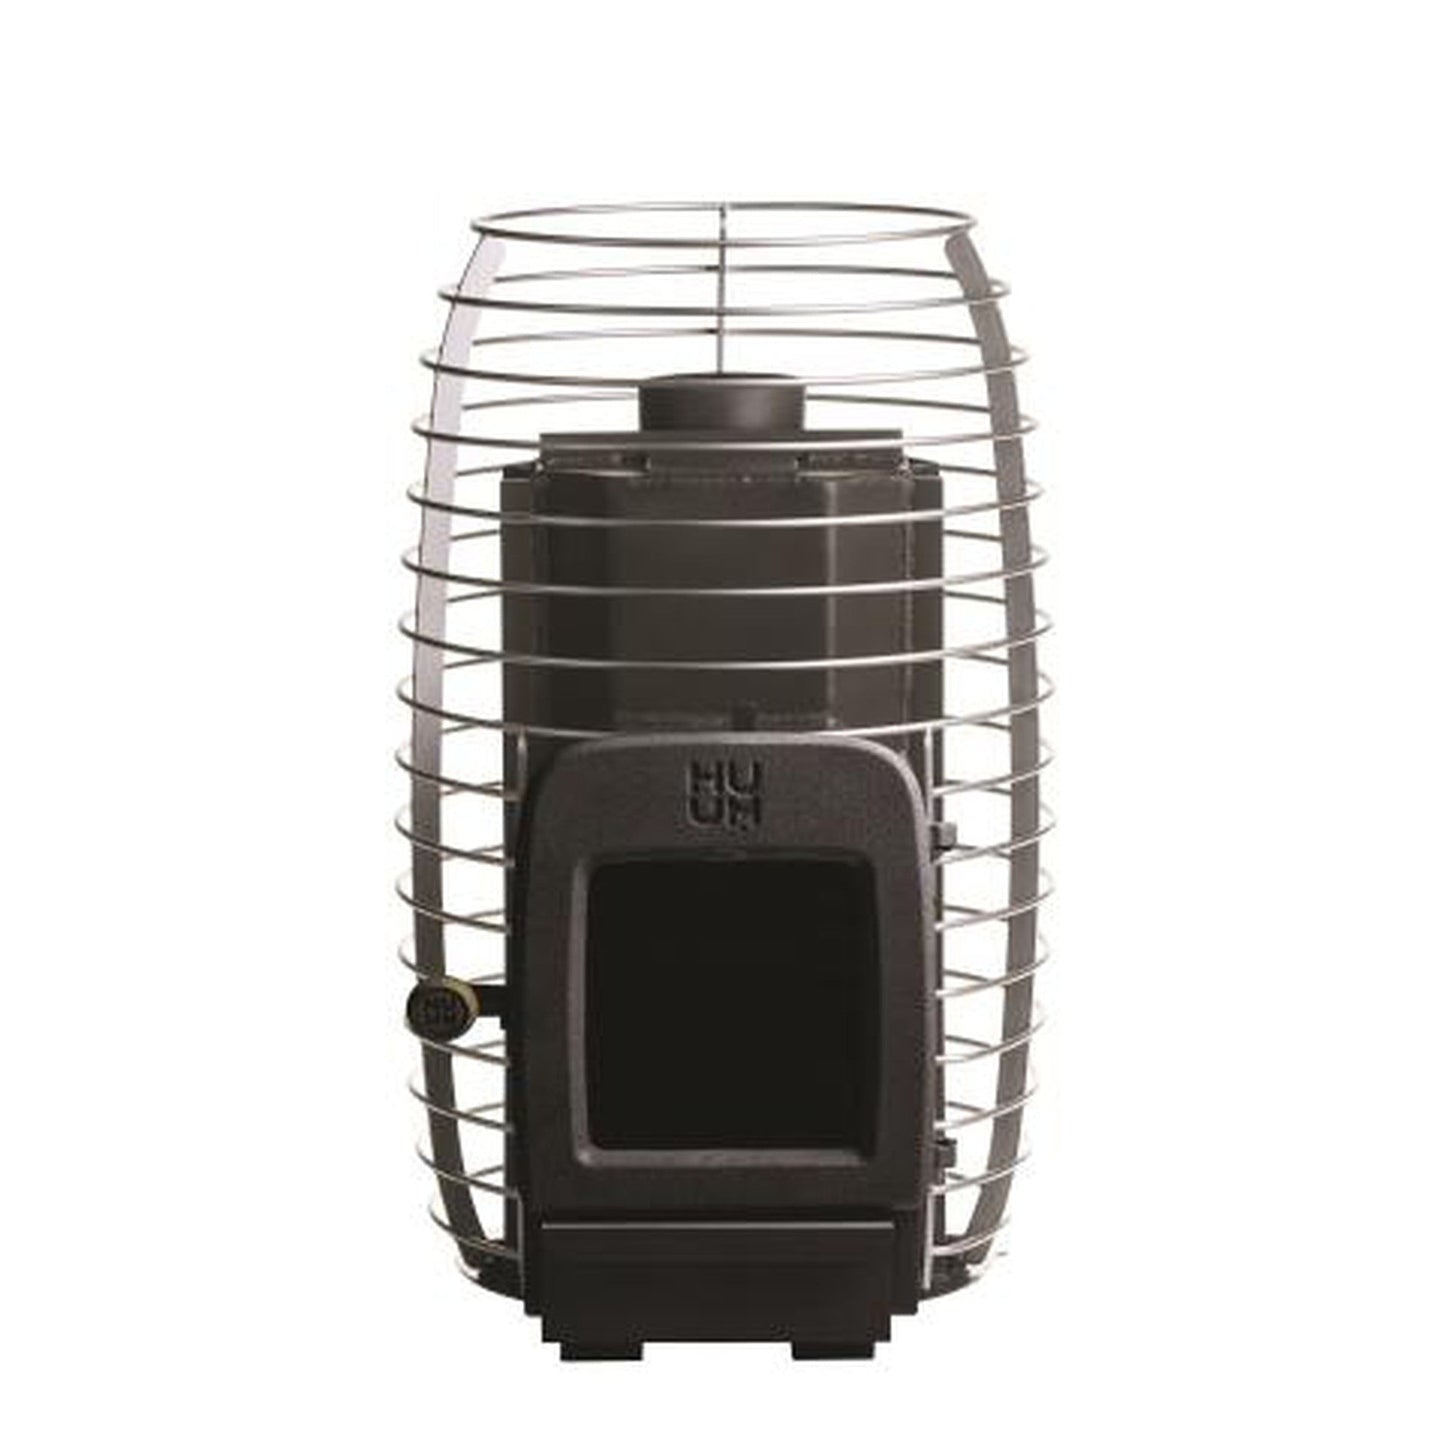 HUUM Hive Heat Brushed Stainless Steel Wood Burning Sauna Stove With Firebox Extension